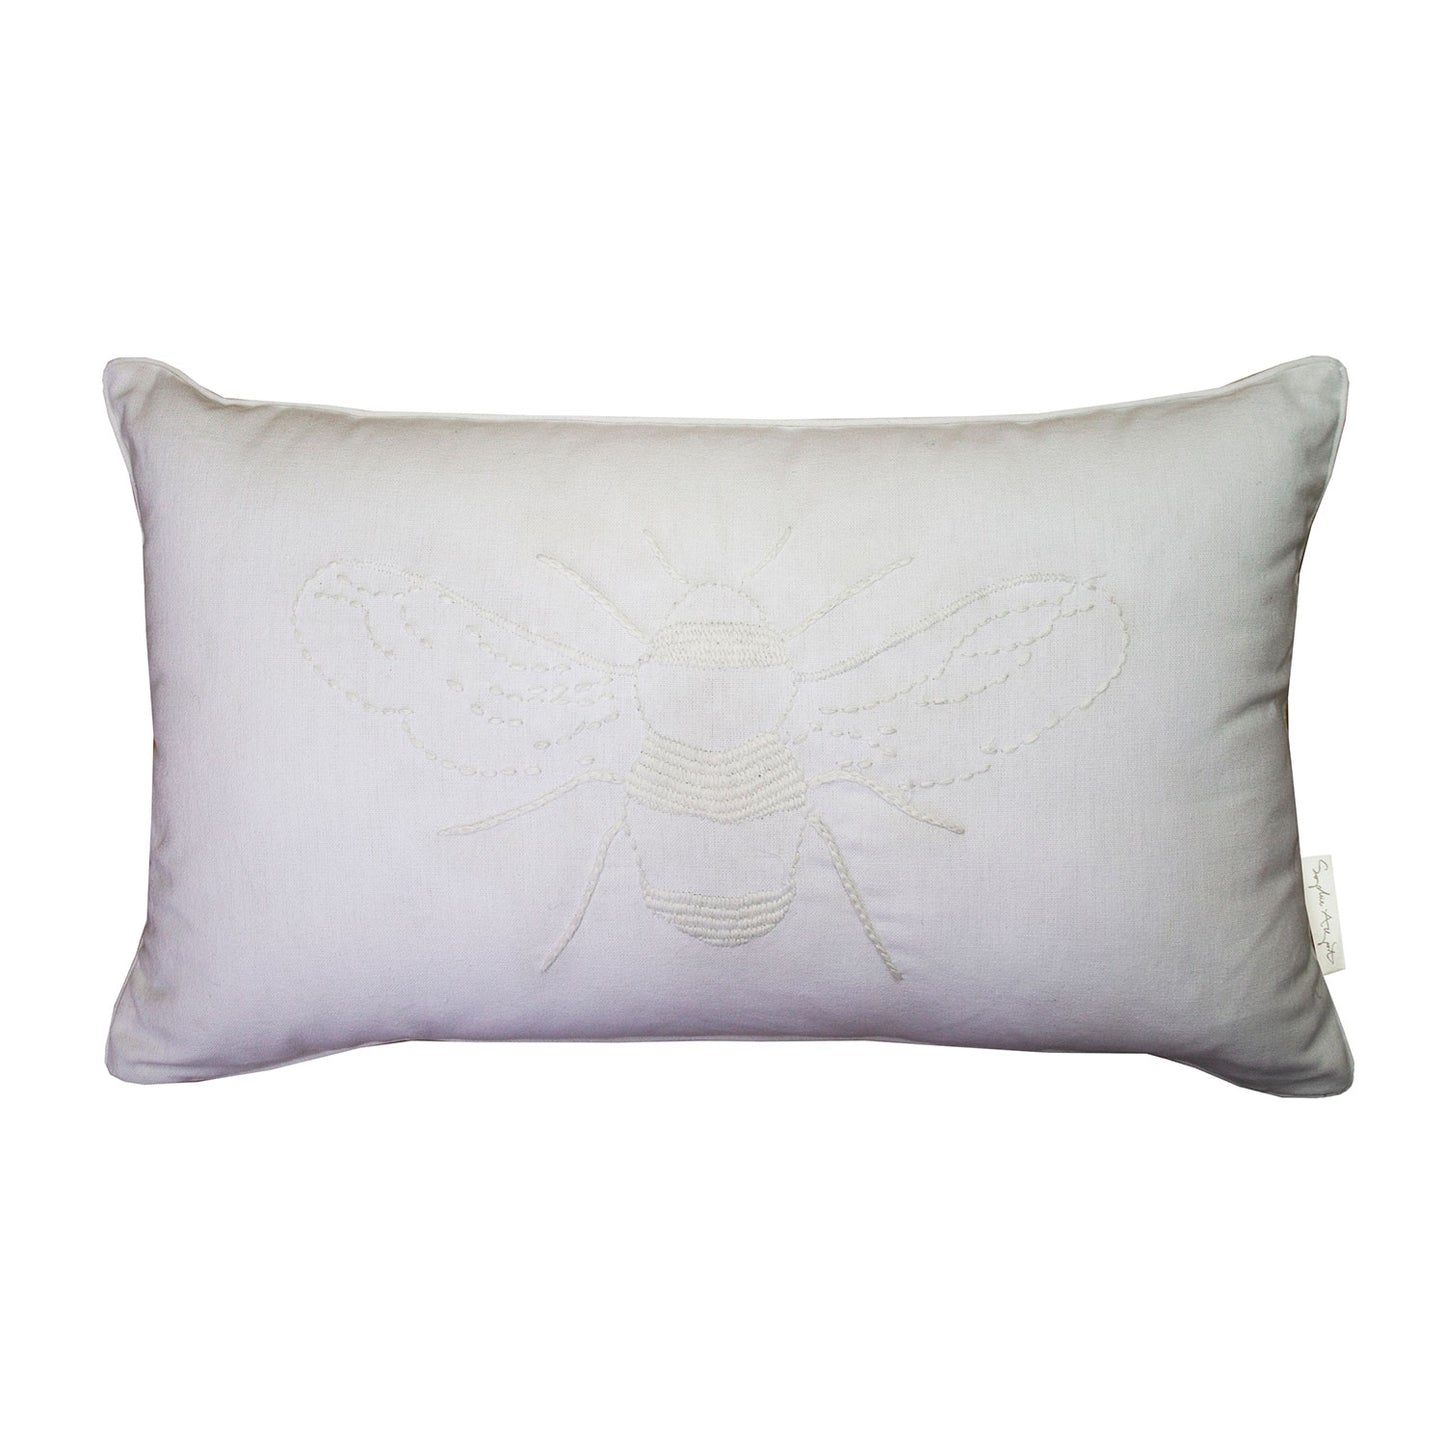 Sophie Allport Bee White Feather Cushion (30cm x 50cm)